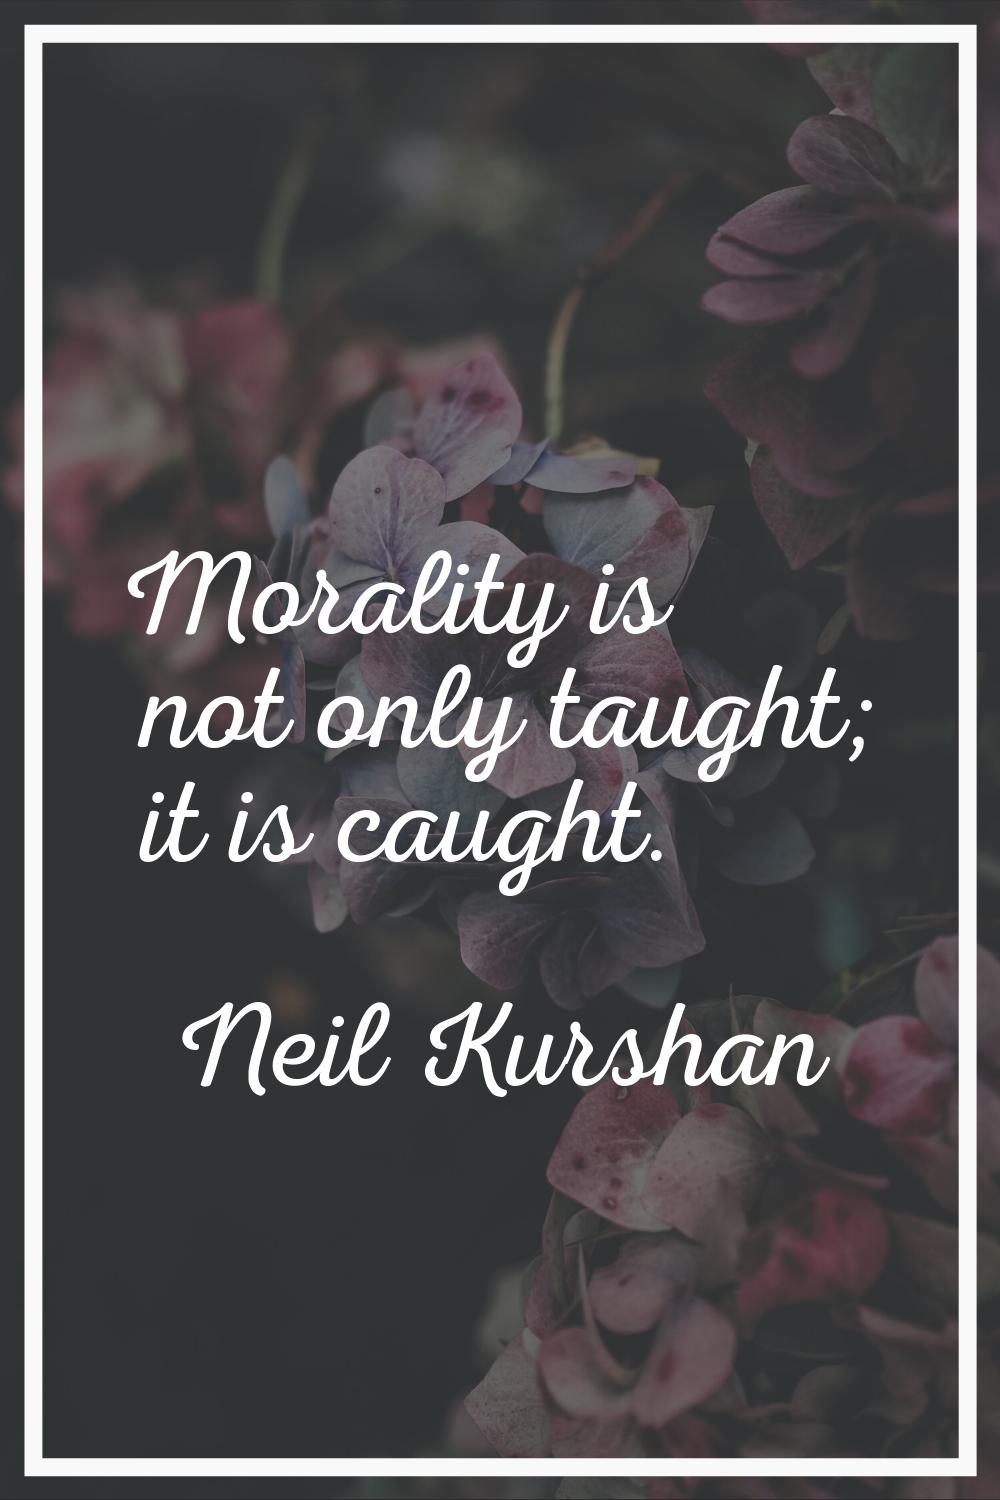 Morality is not only taught; it is caught.